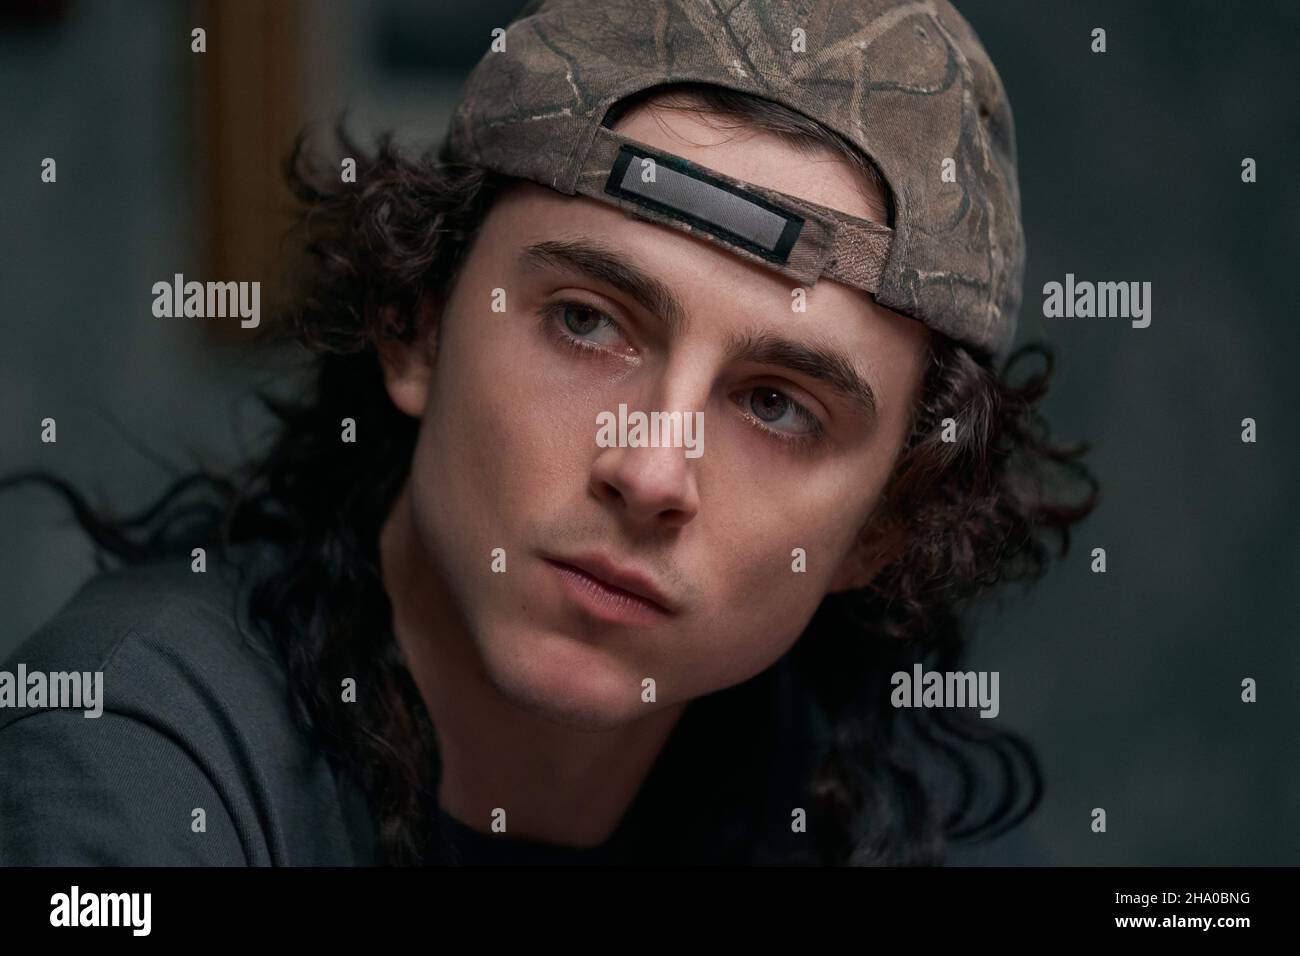 Timothee Chalamet, 'Don't Look Up' (2021). Photo credit: Niko Tavernise / Netflix / The Hollywood Archive Stock Photo